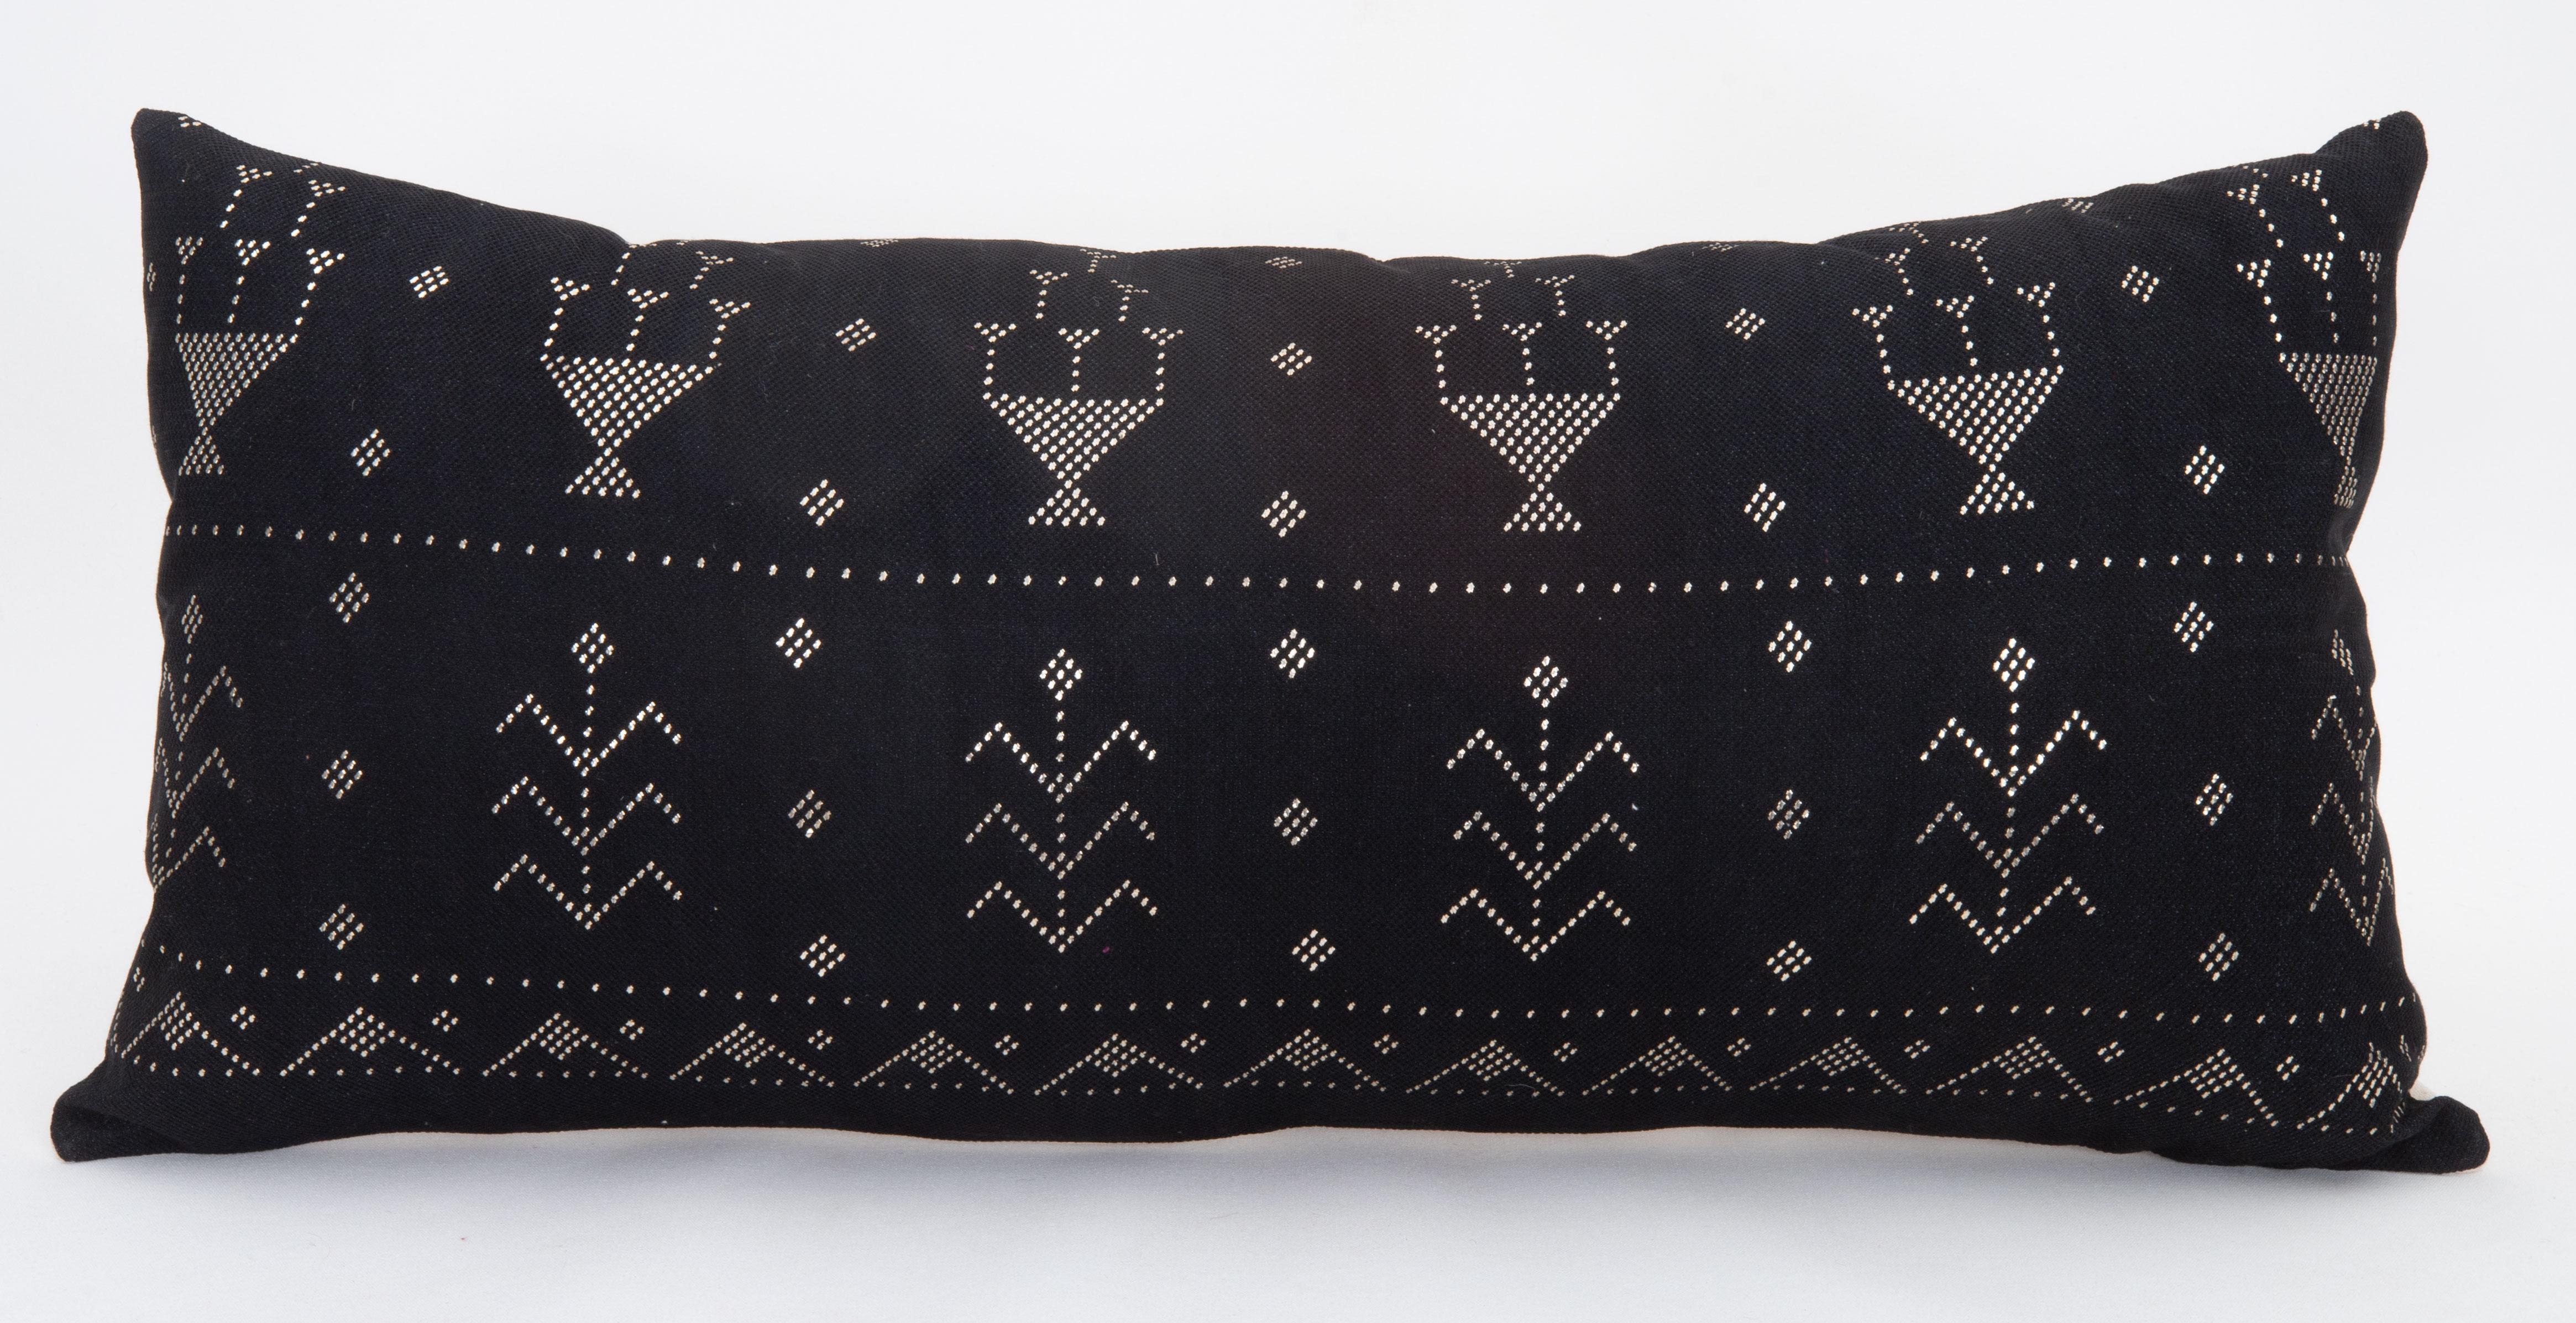 Embroidered Pillow Cover Fashioned from  Vintage Egyptian ‘tulli bi telli’, Assuit Textile For Sale